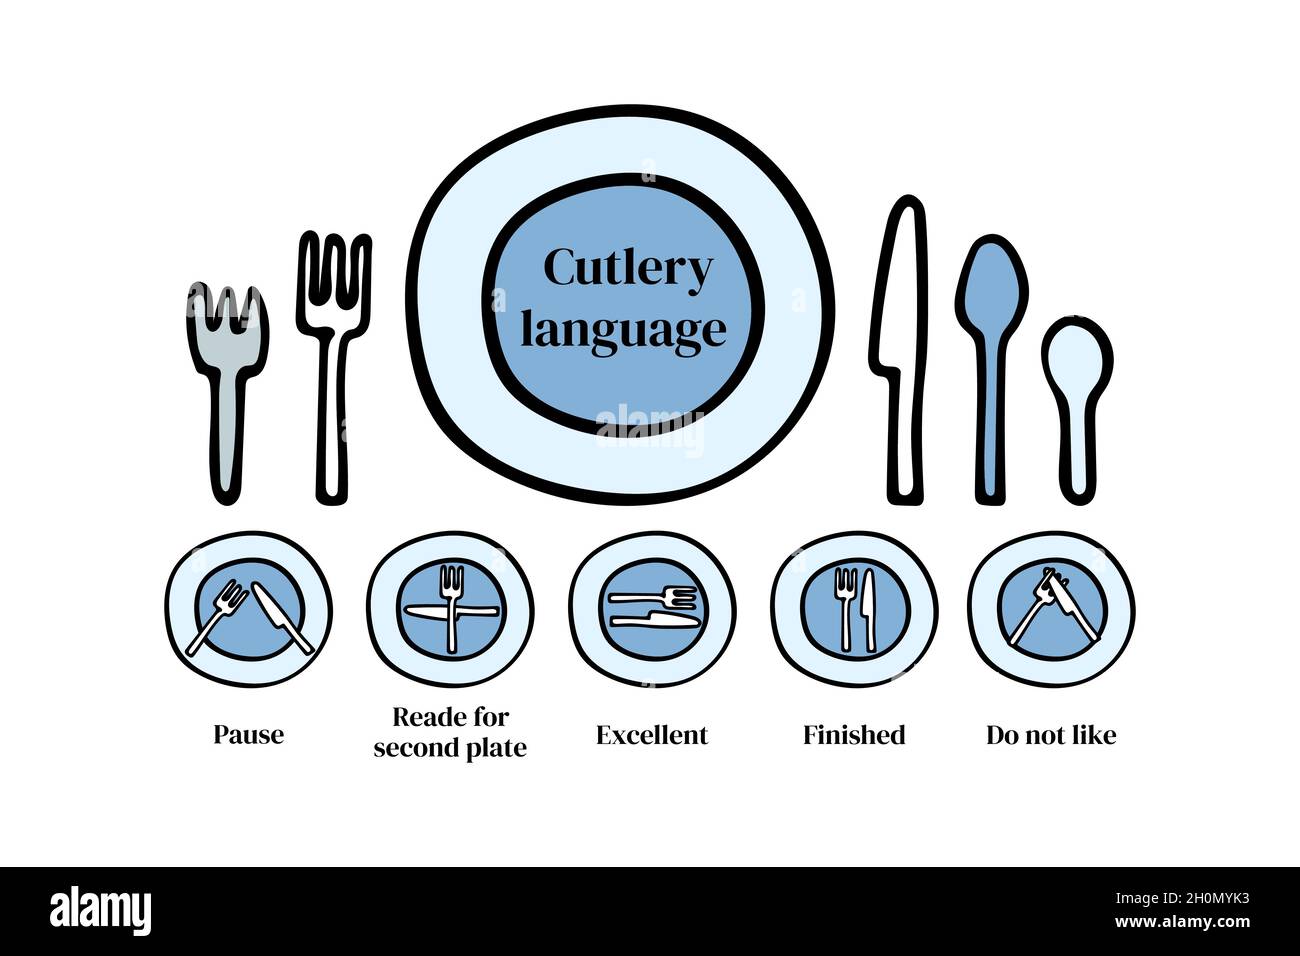 Cutlery language etiquette. Forks and knife on a plate, signs. Vector illustrations. Stock Vector